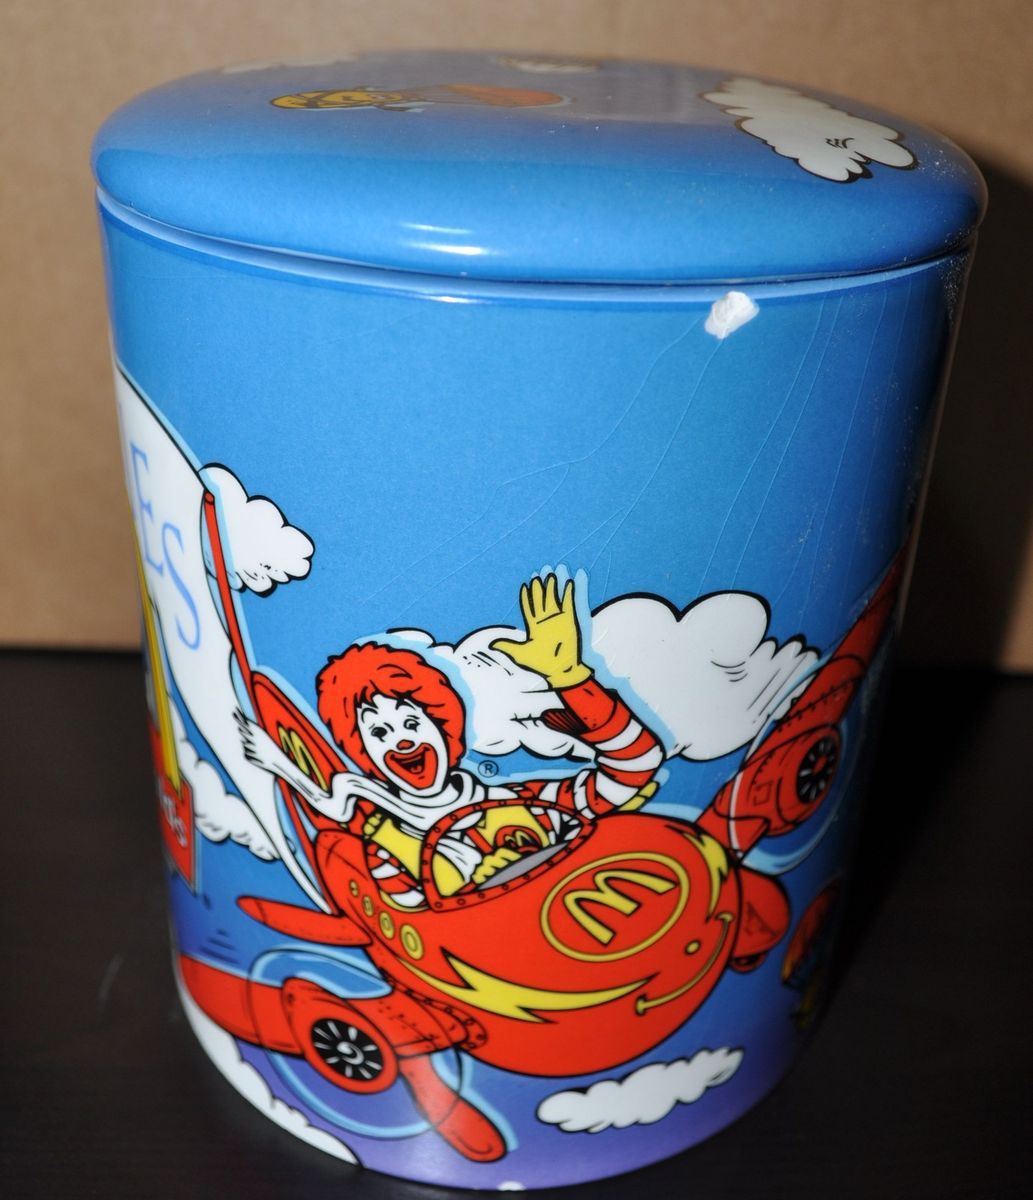 2002 Ronald McDonald Friends Blue Cookie Jar Very Collectable